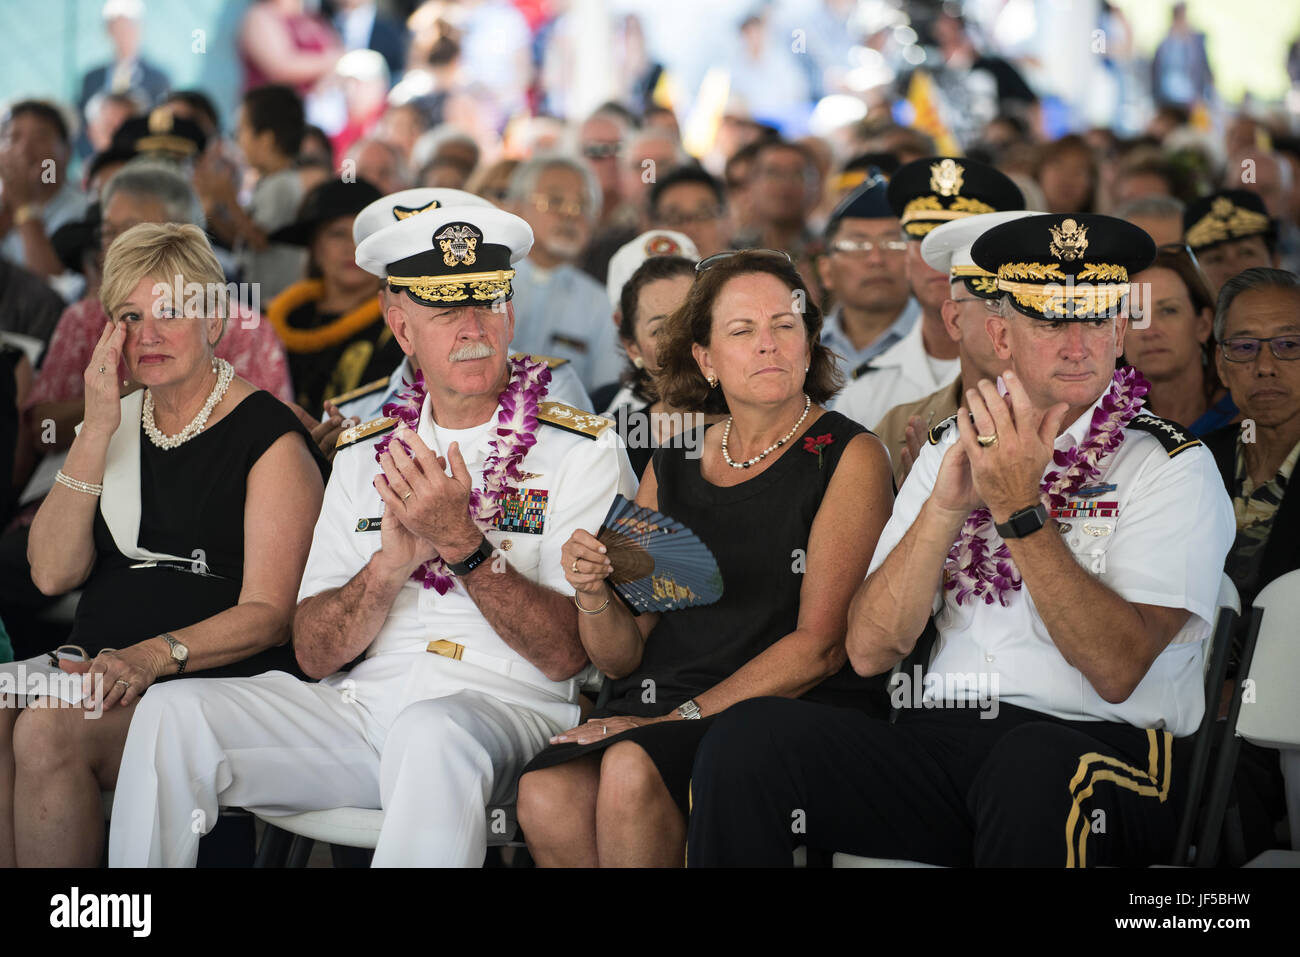 170529-N-ON707-152HONOLULU (May 29, 2017)—Adm. Scott Swift, Commander of U.S. Pacific Fleet and Gen. Robert B. Brown, Commanding General of U.S. Army Pacific, clap during the Memorial Day Ceremony at the 68th annual Memorial Day Ceremony at the National Memorial Cemetery of the Pacific. Active-duty military, decorated veterans, government officials, community and family members gathered during the ceremony to remember and honor fallen military veterans. (U.S. Navy photo by Mass Communication Specialist 2nd Class James Mullen/Released) Stock Photo